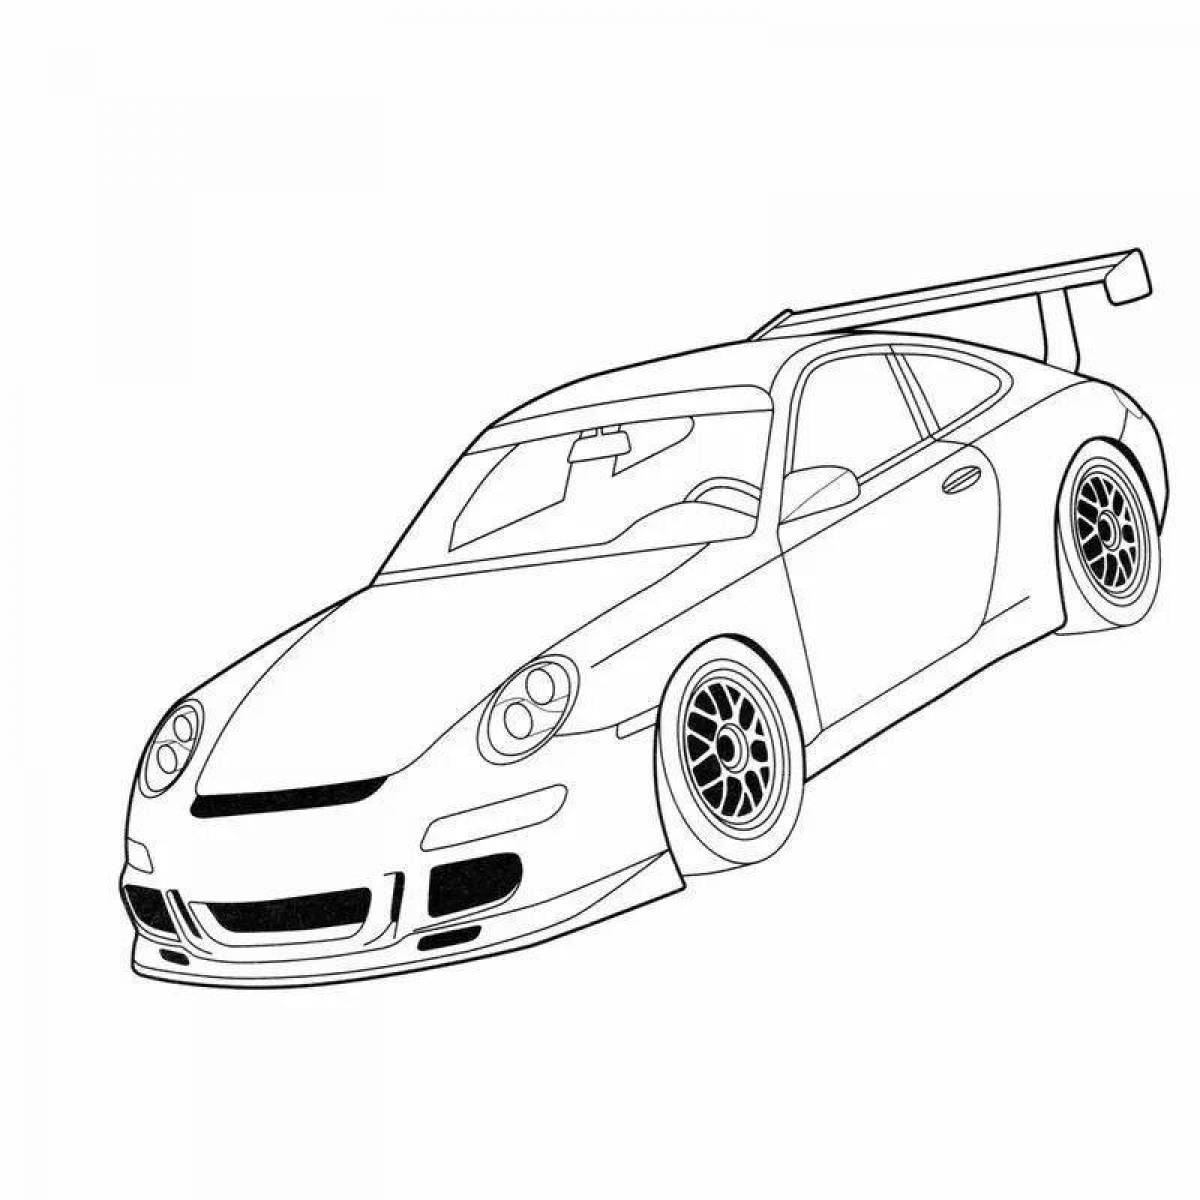 Exalted porsche panamera coloring page